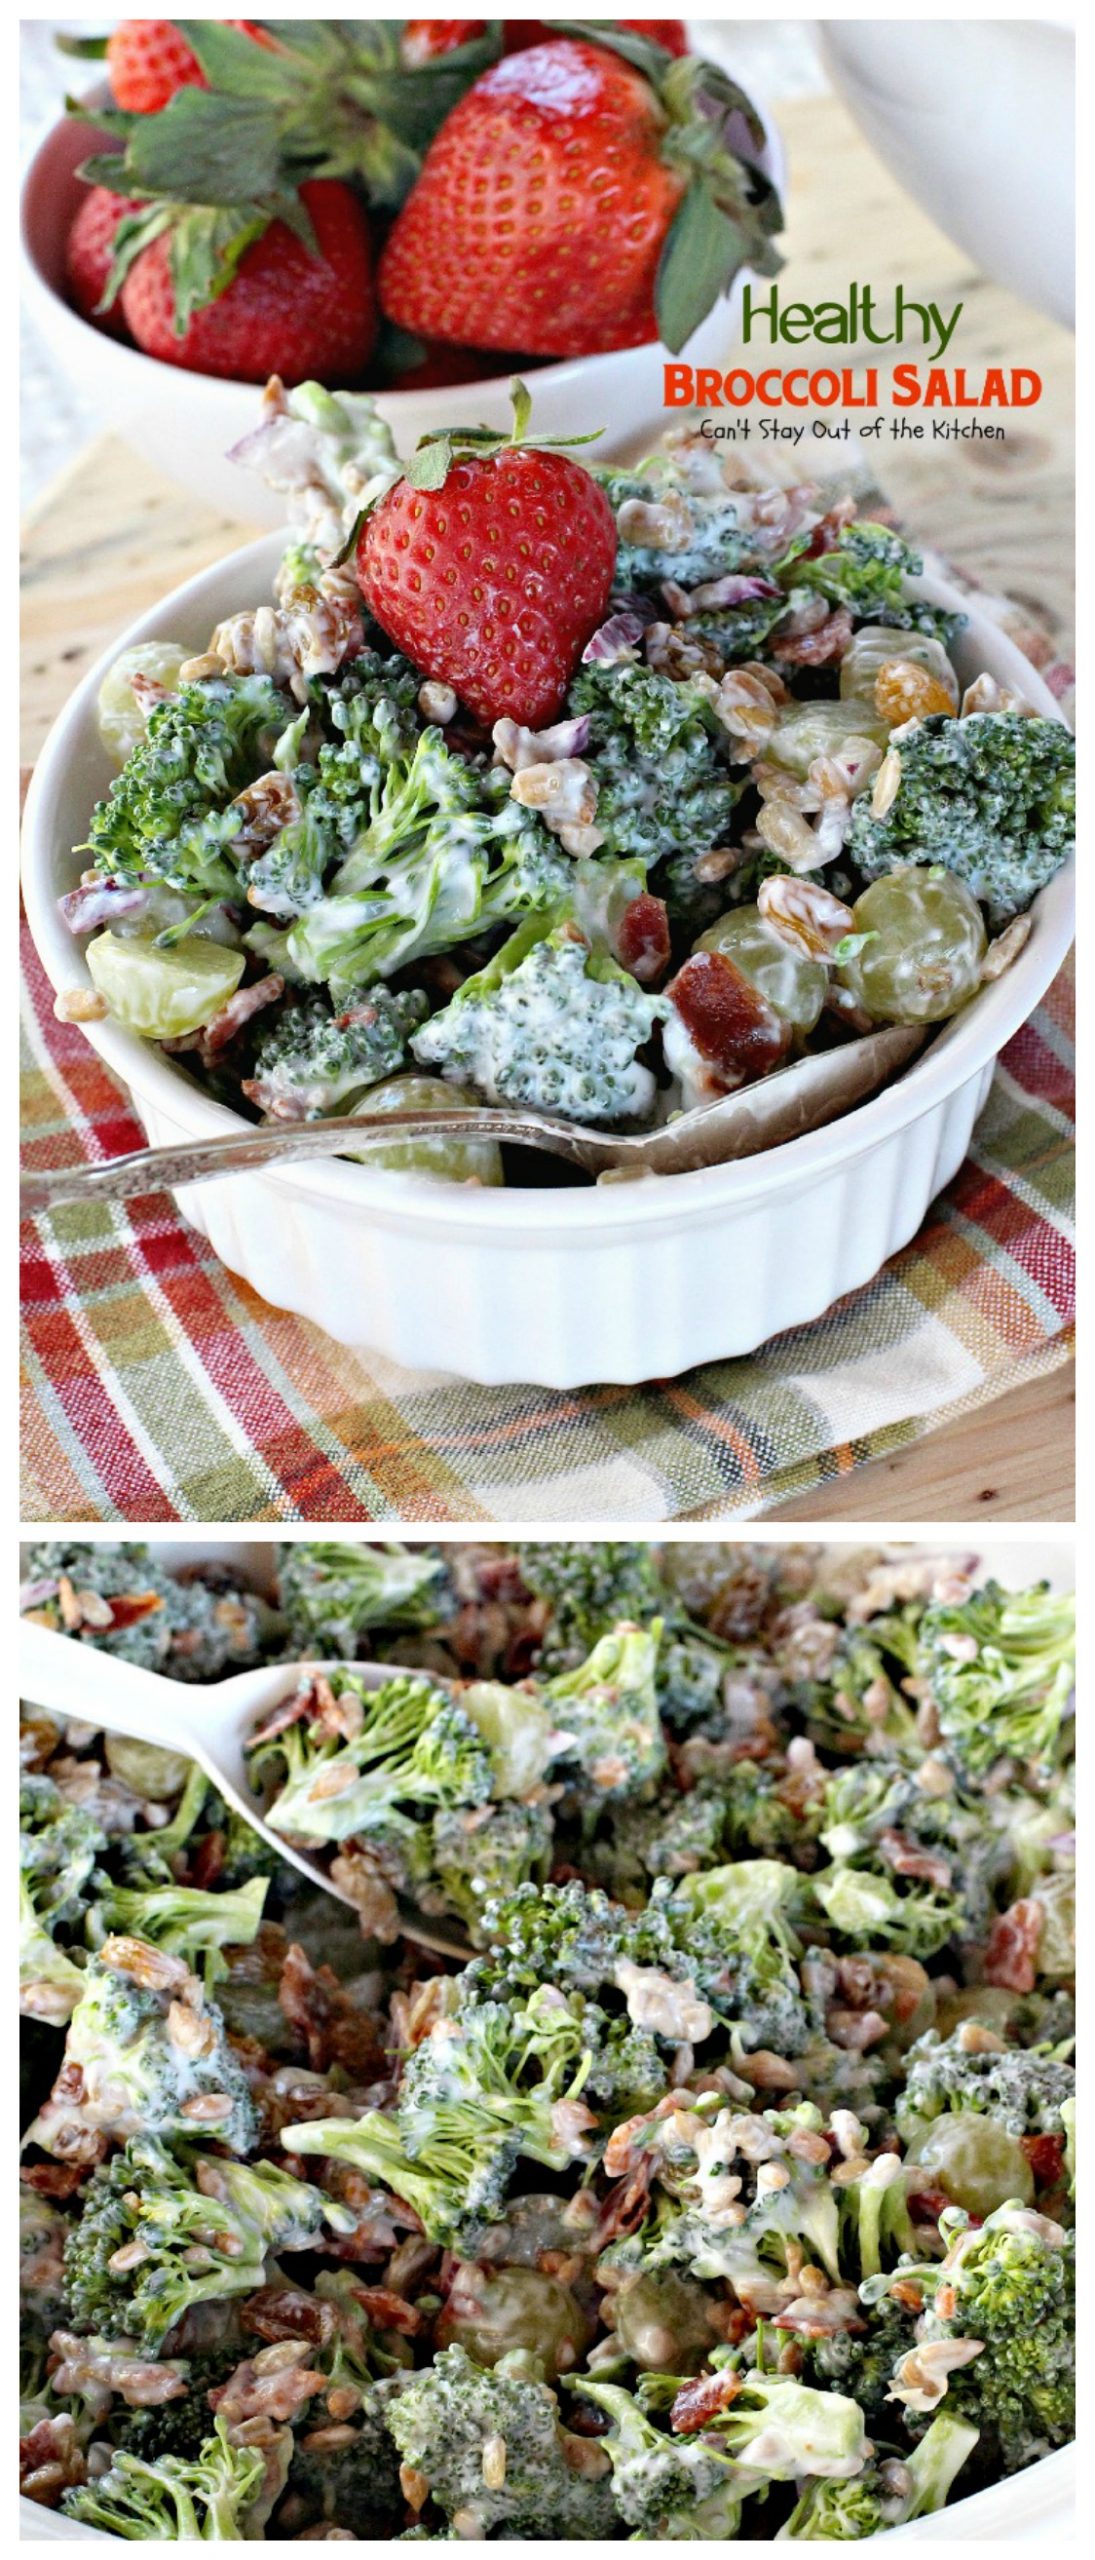 Healthy Broccoli Salad | Can't Stay Out of the Kitchen